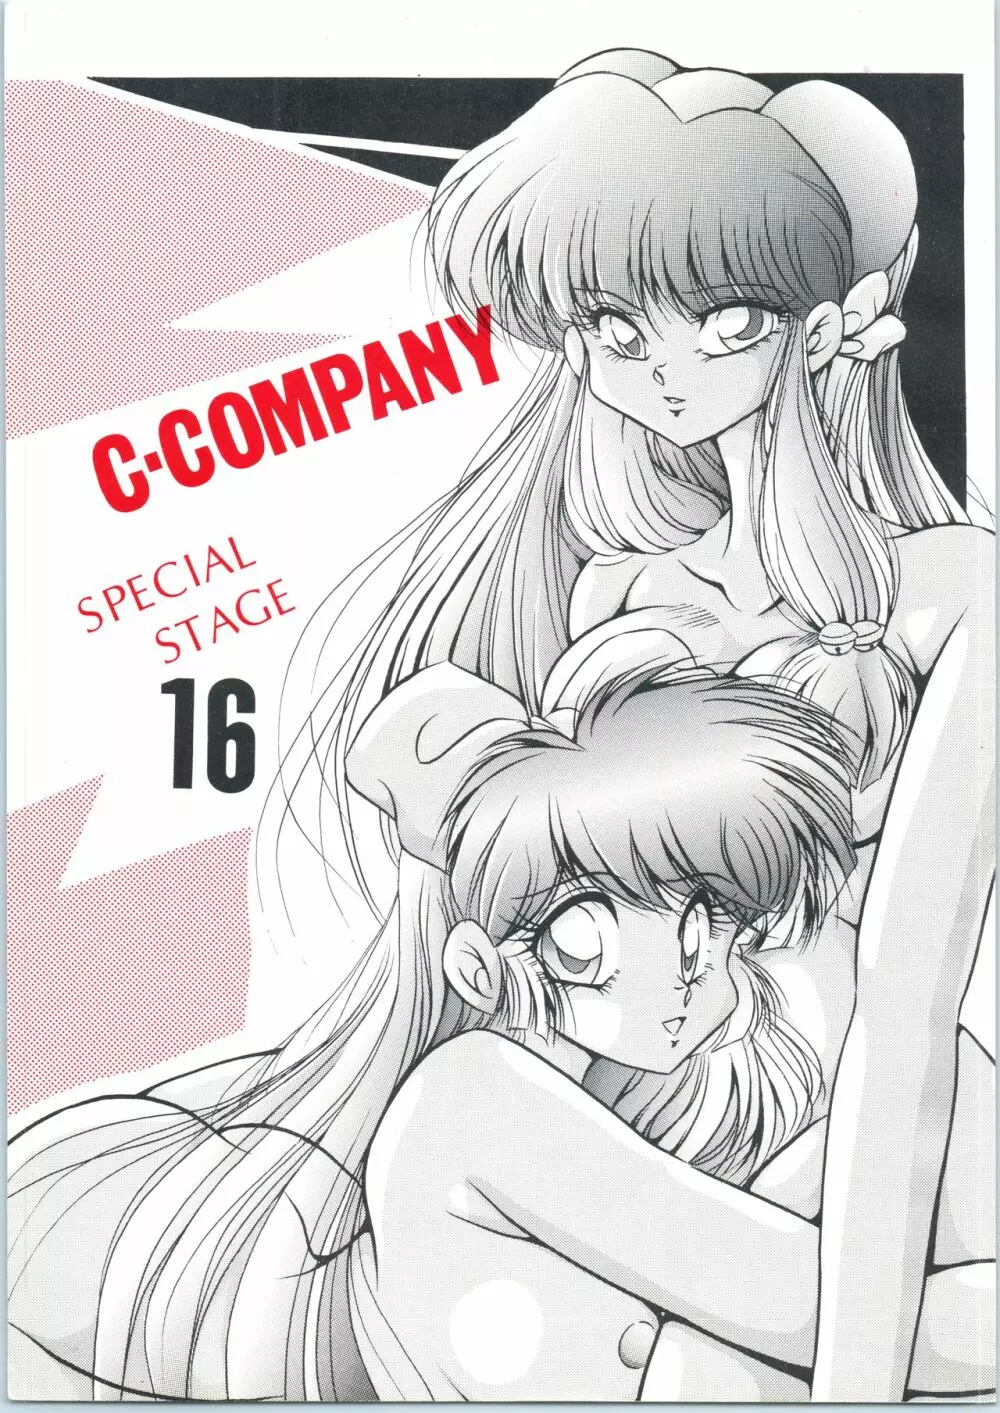 C-COMPANY SPECIAL STAGE 16 1ページ